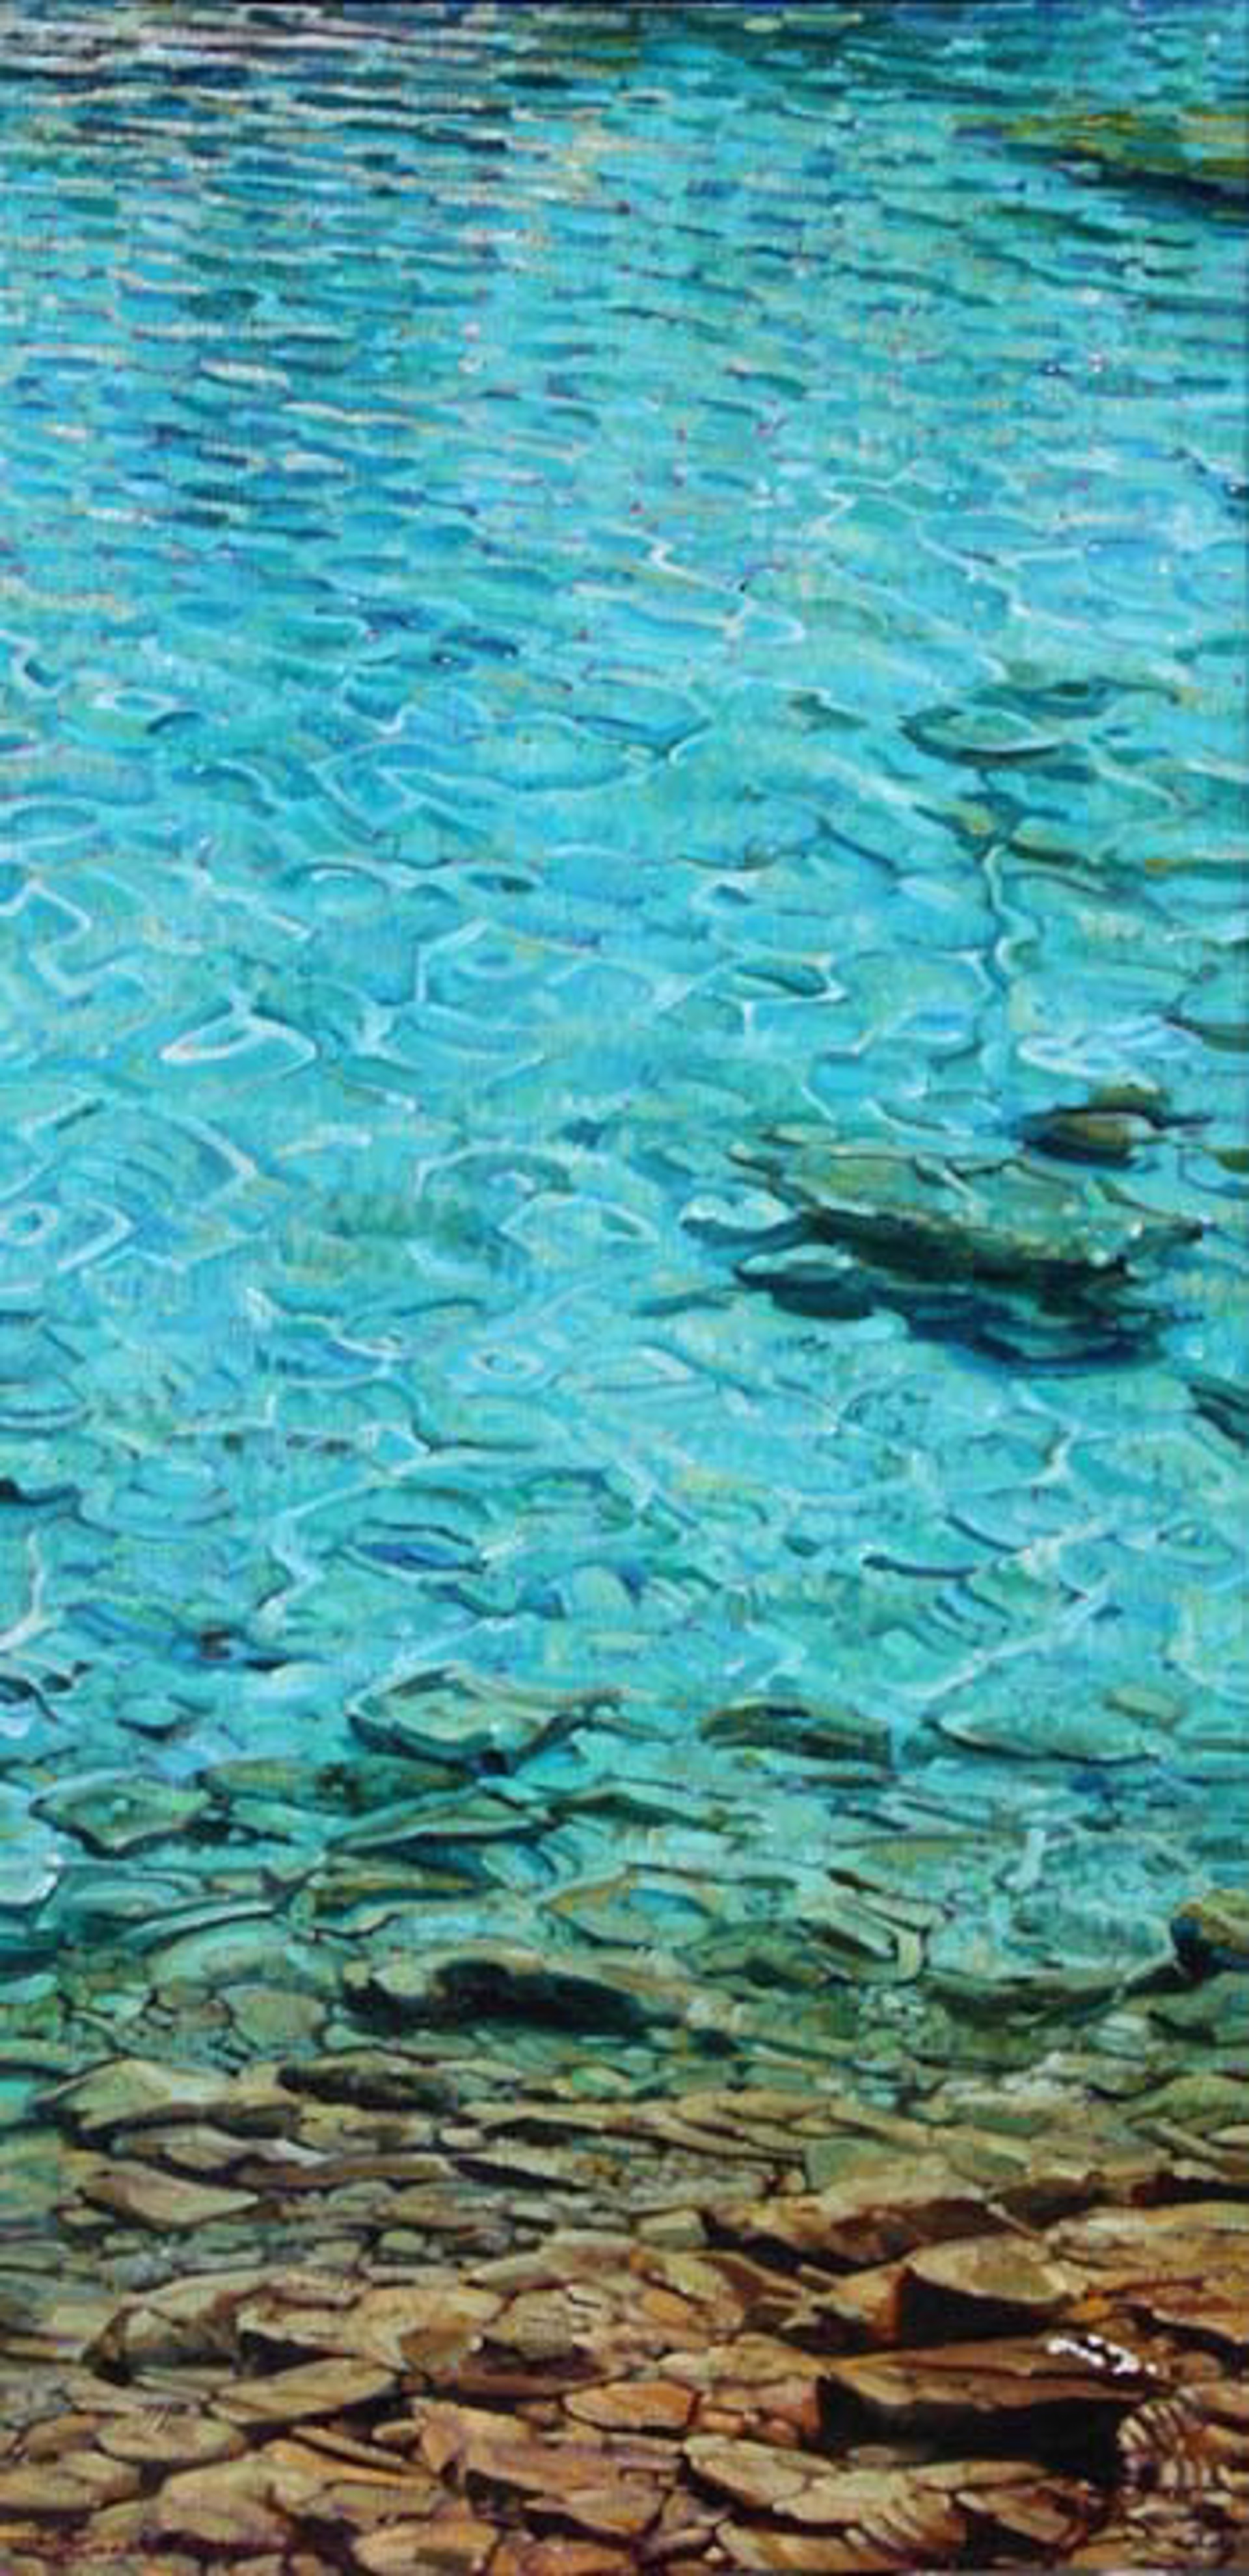 Mediterranean Blues IV - SOLD by Commission Possibilities / Previously Sold ZX